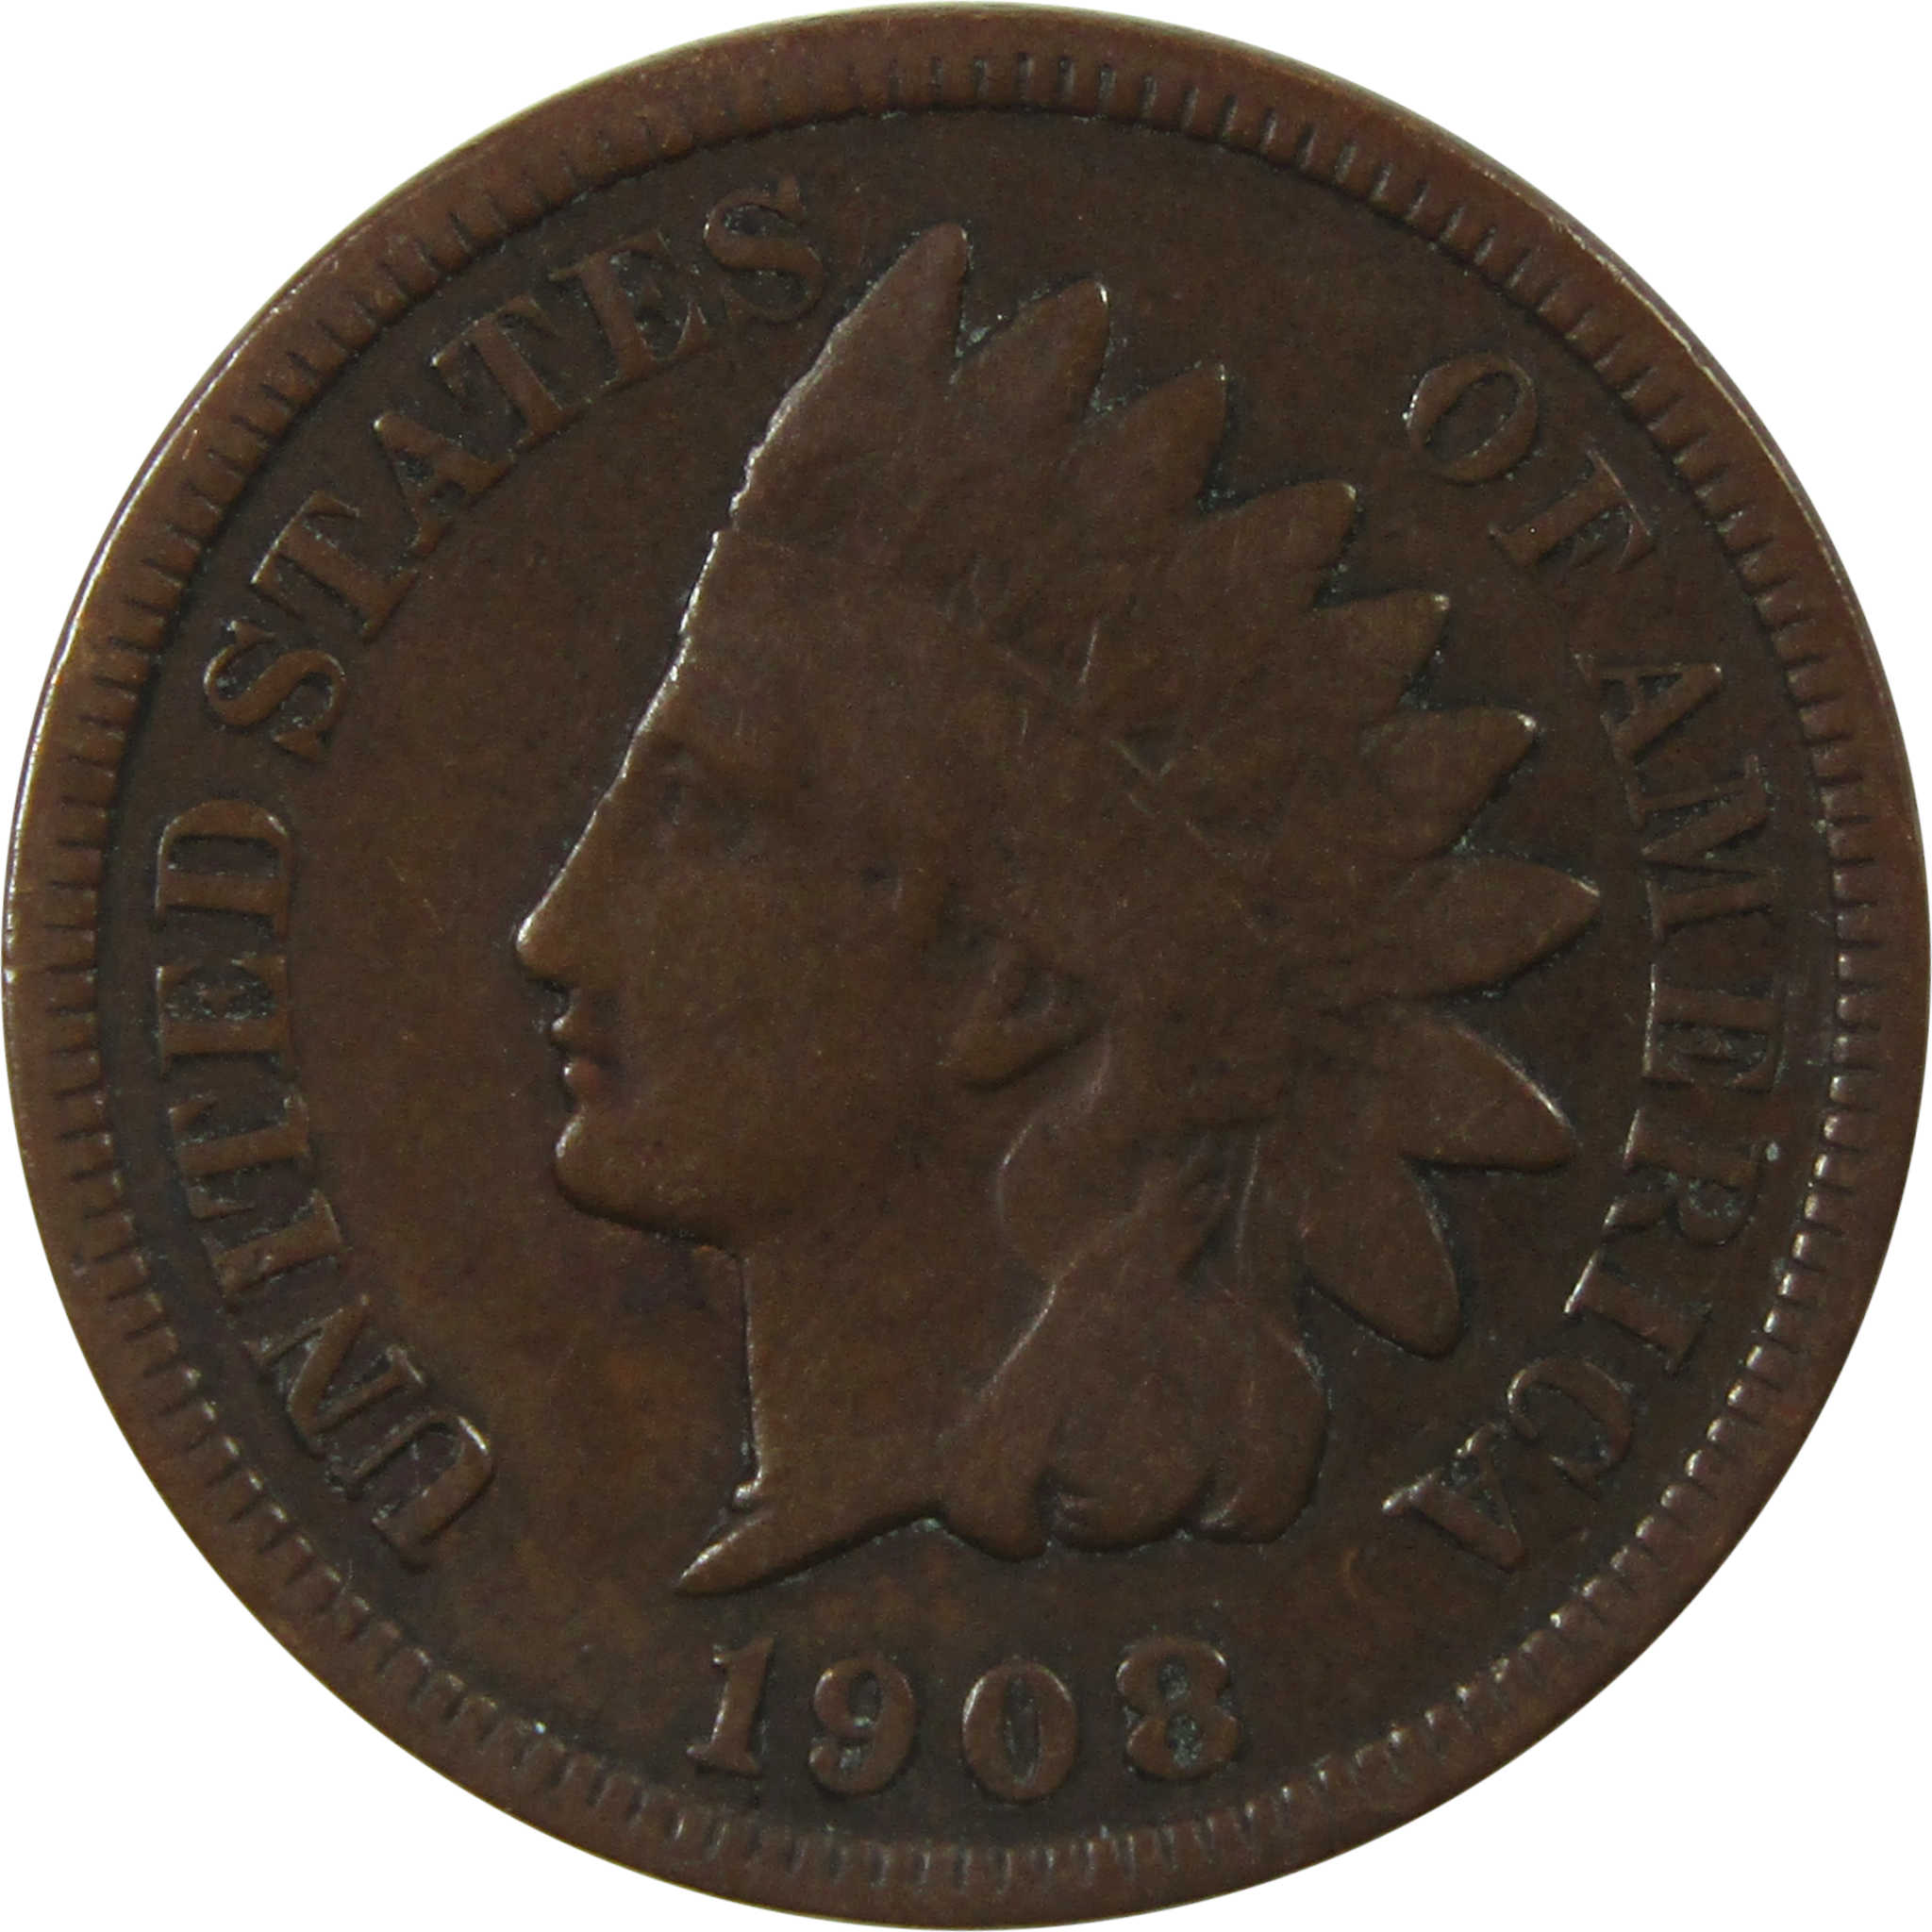 1908 S Indian Head Cent VG Very Good Details Penny 1c Coin SKU:I13662